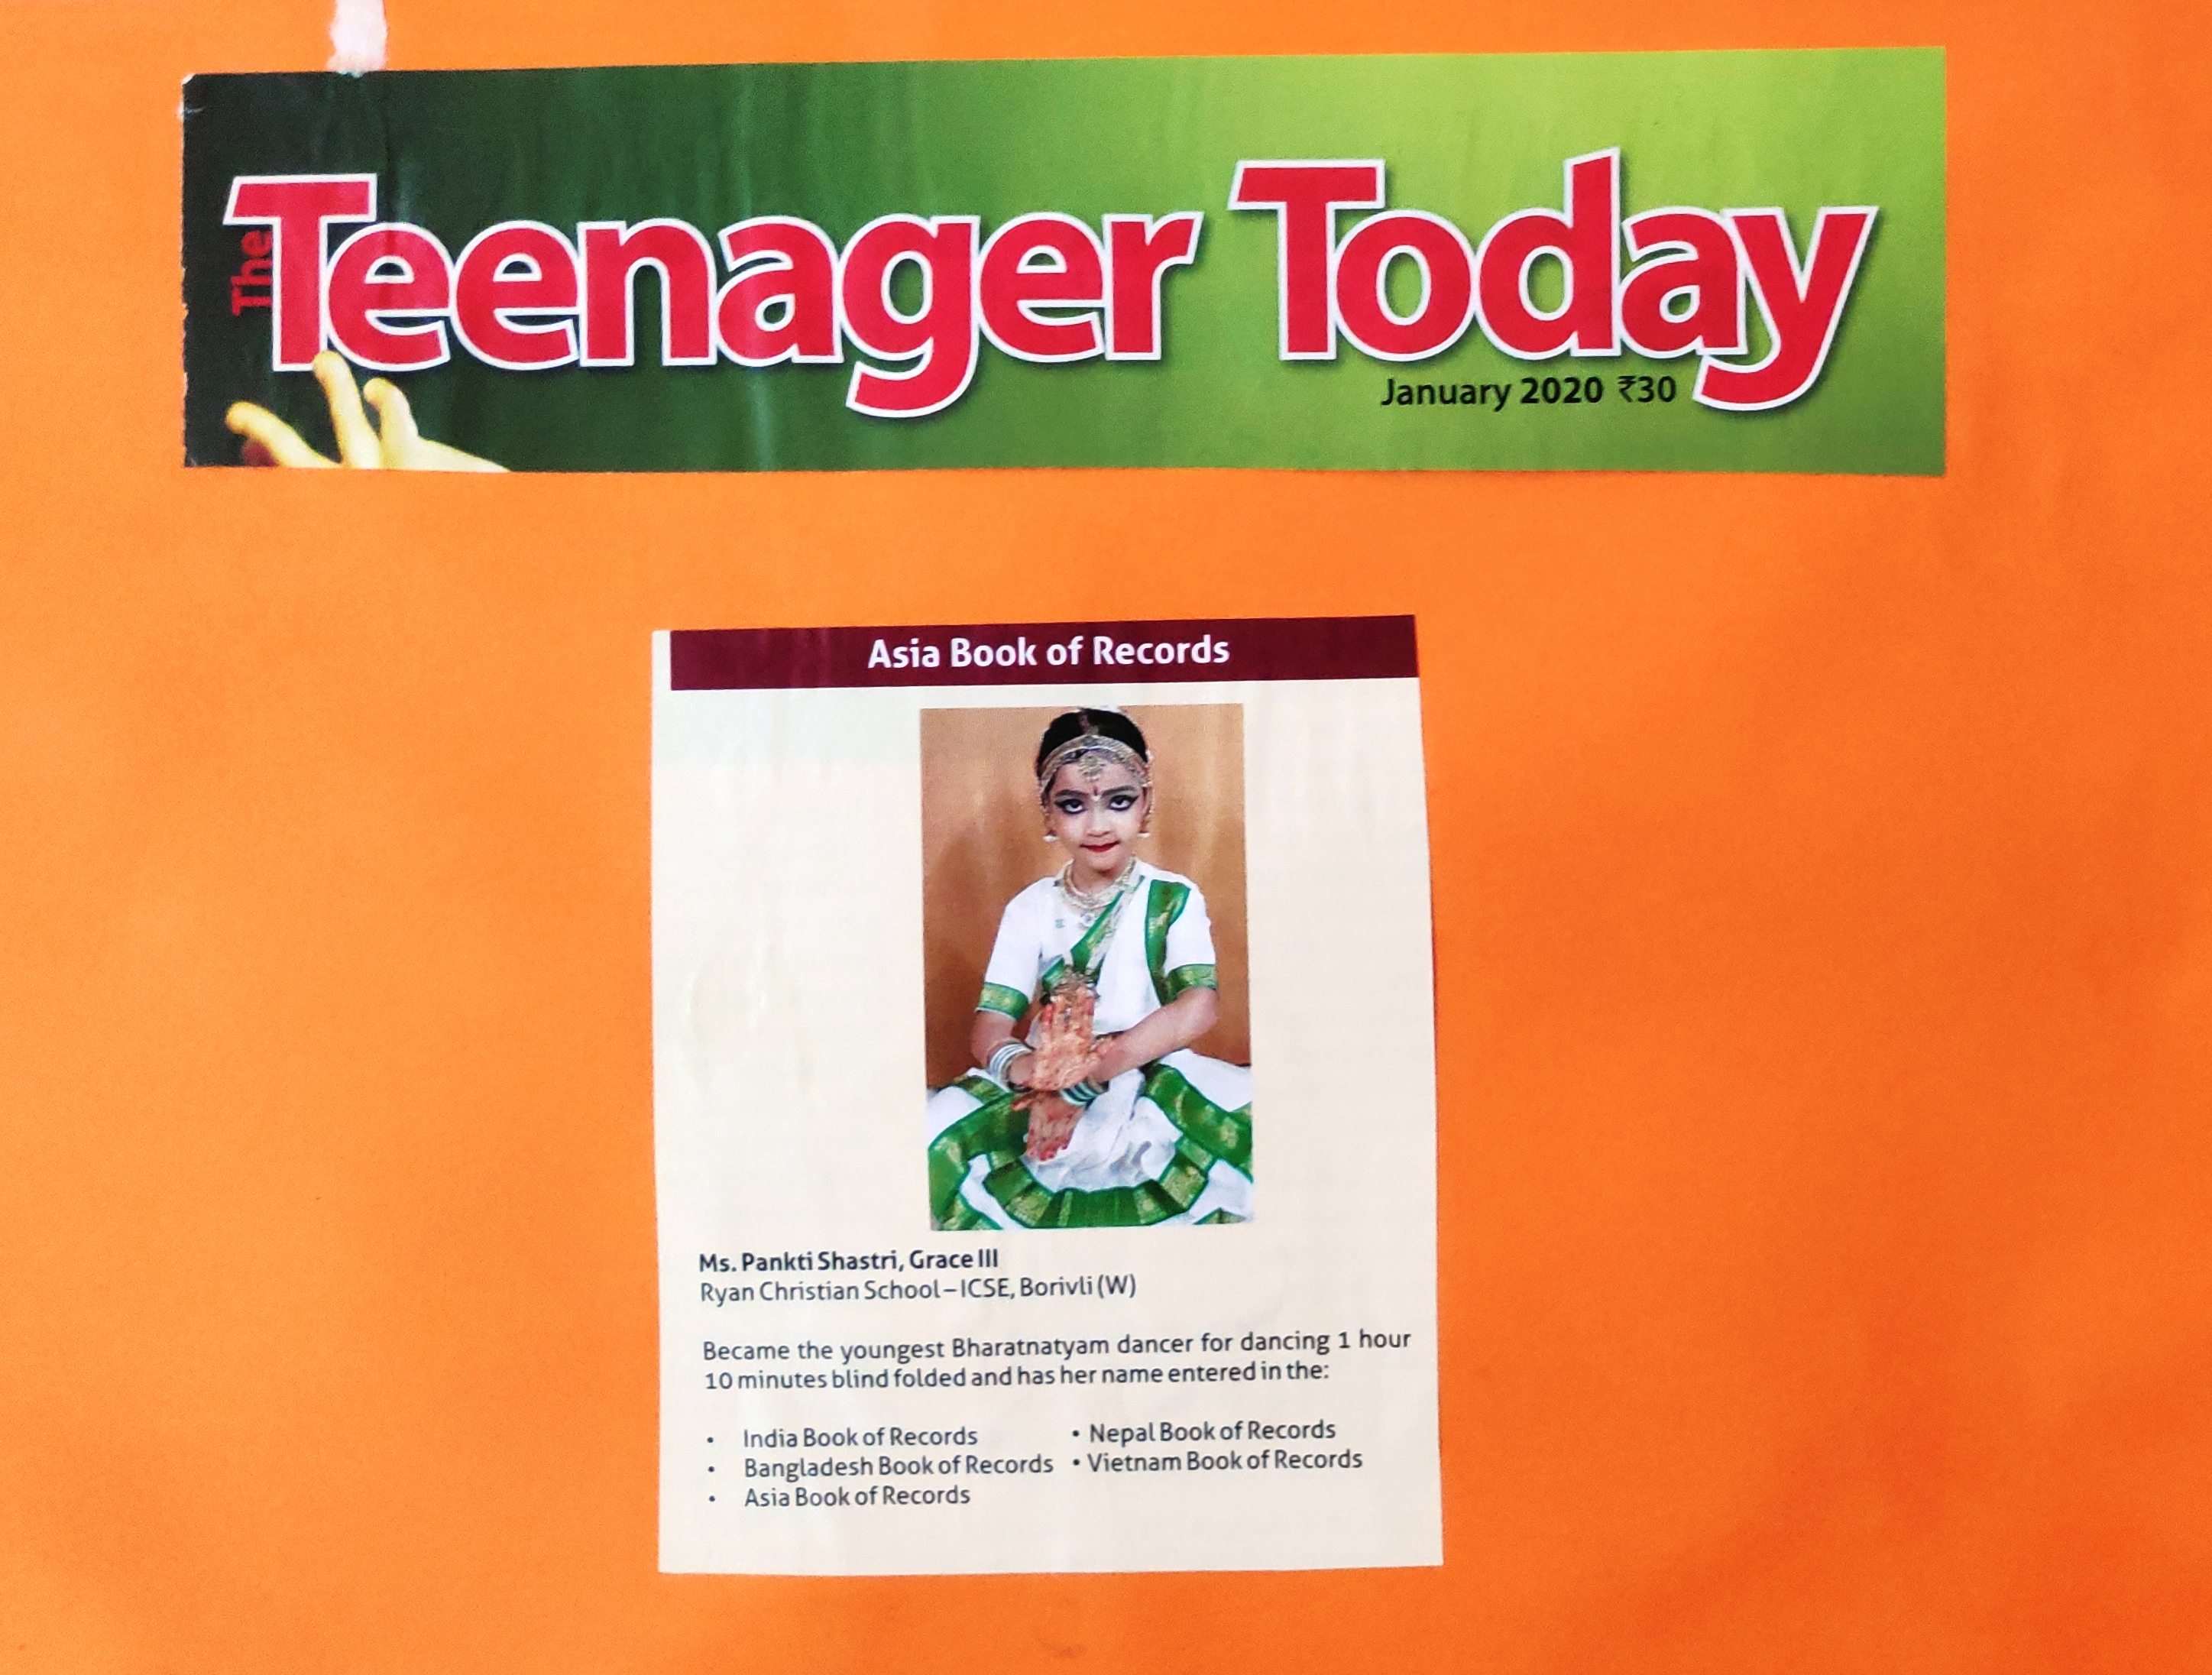 Ms Pankti Shastri’s 1 hr 10 min blindfolded dance was featured in Teenager Today